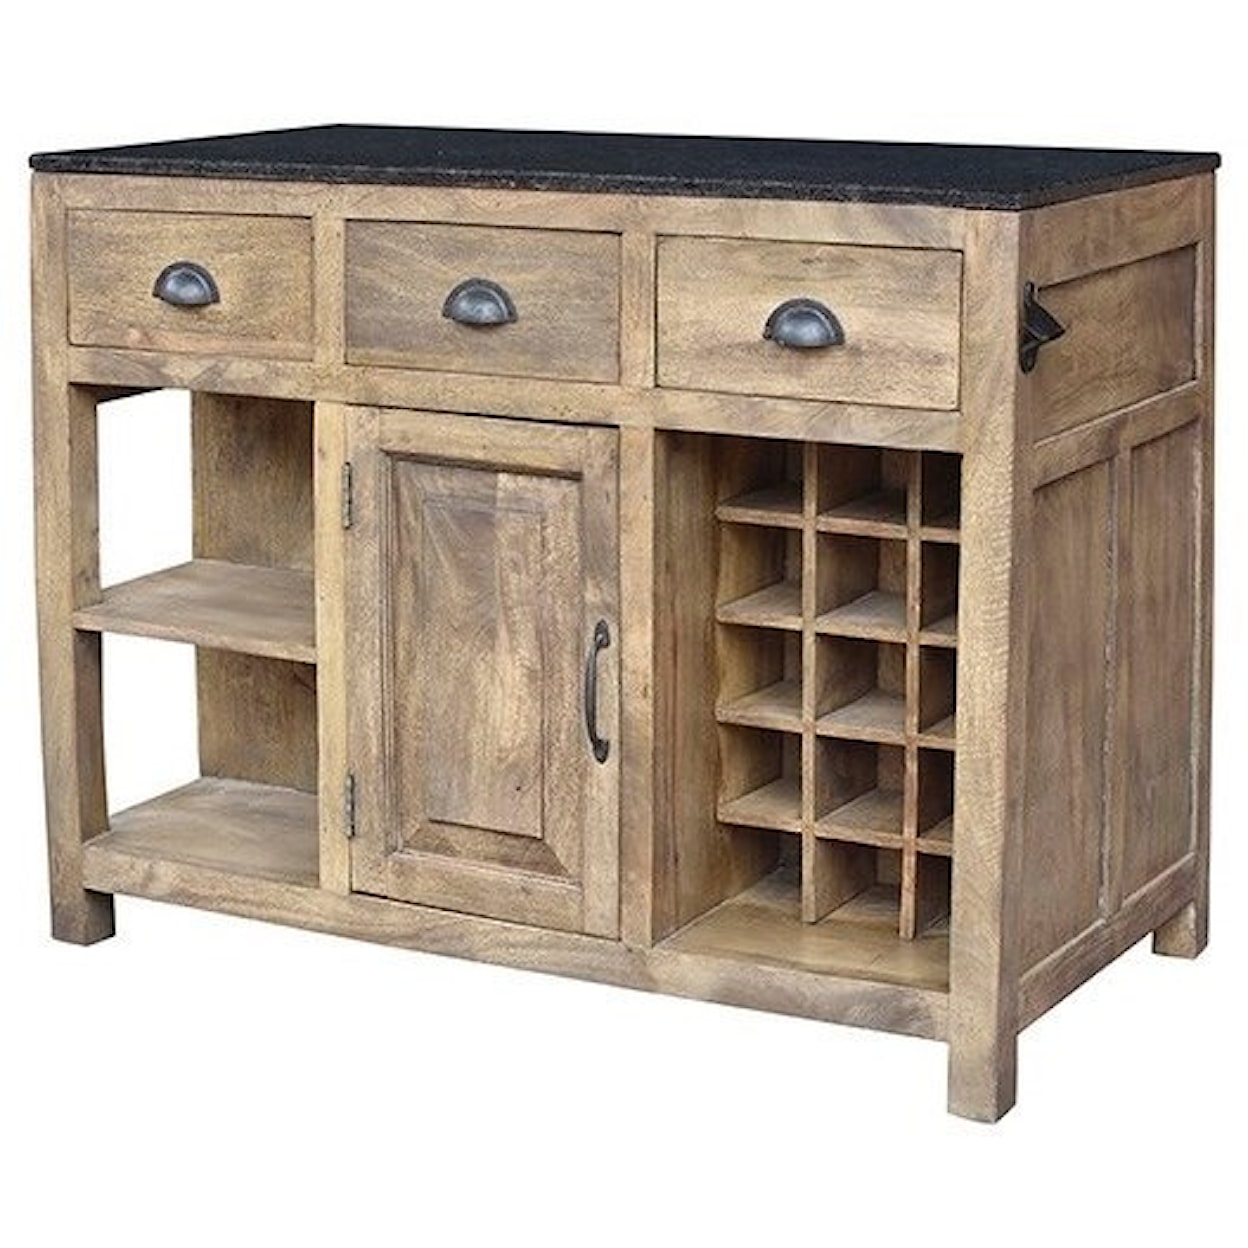 Crestview Collection Accent Furniture Mango Wood and Granite Island